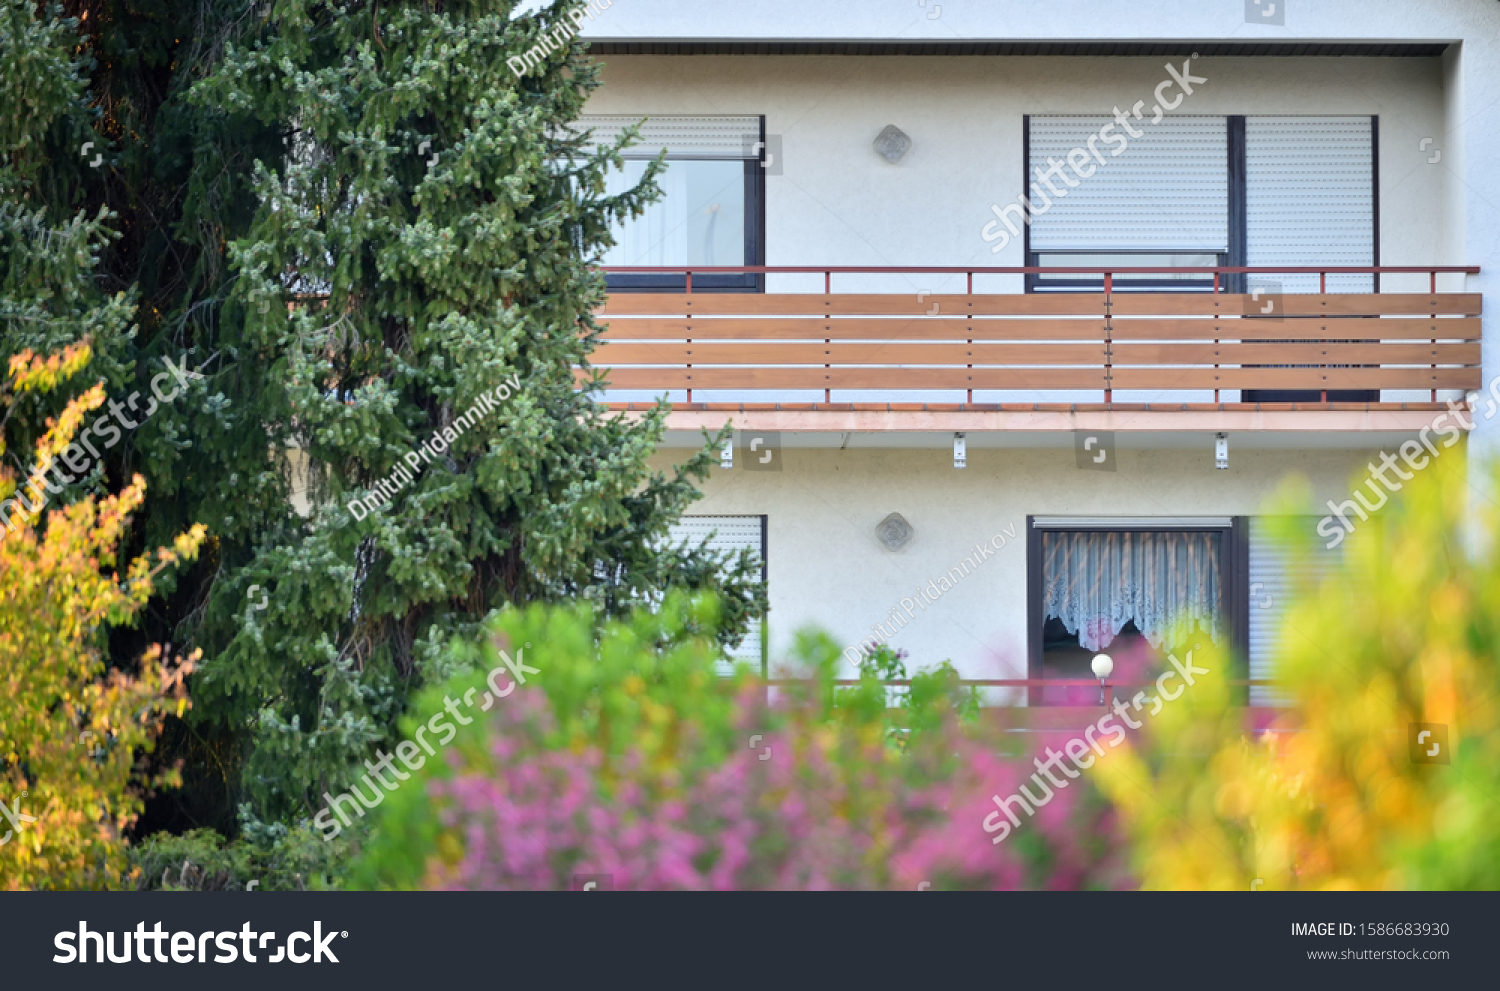 Wooden balcony of a residential building in a residential area of a European city #1586683930